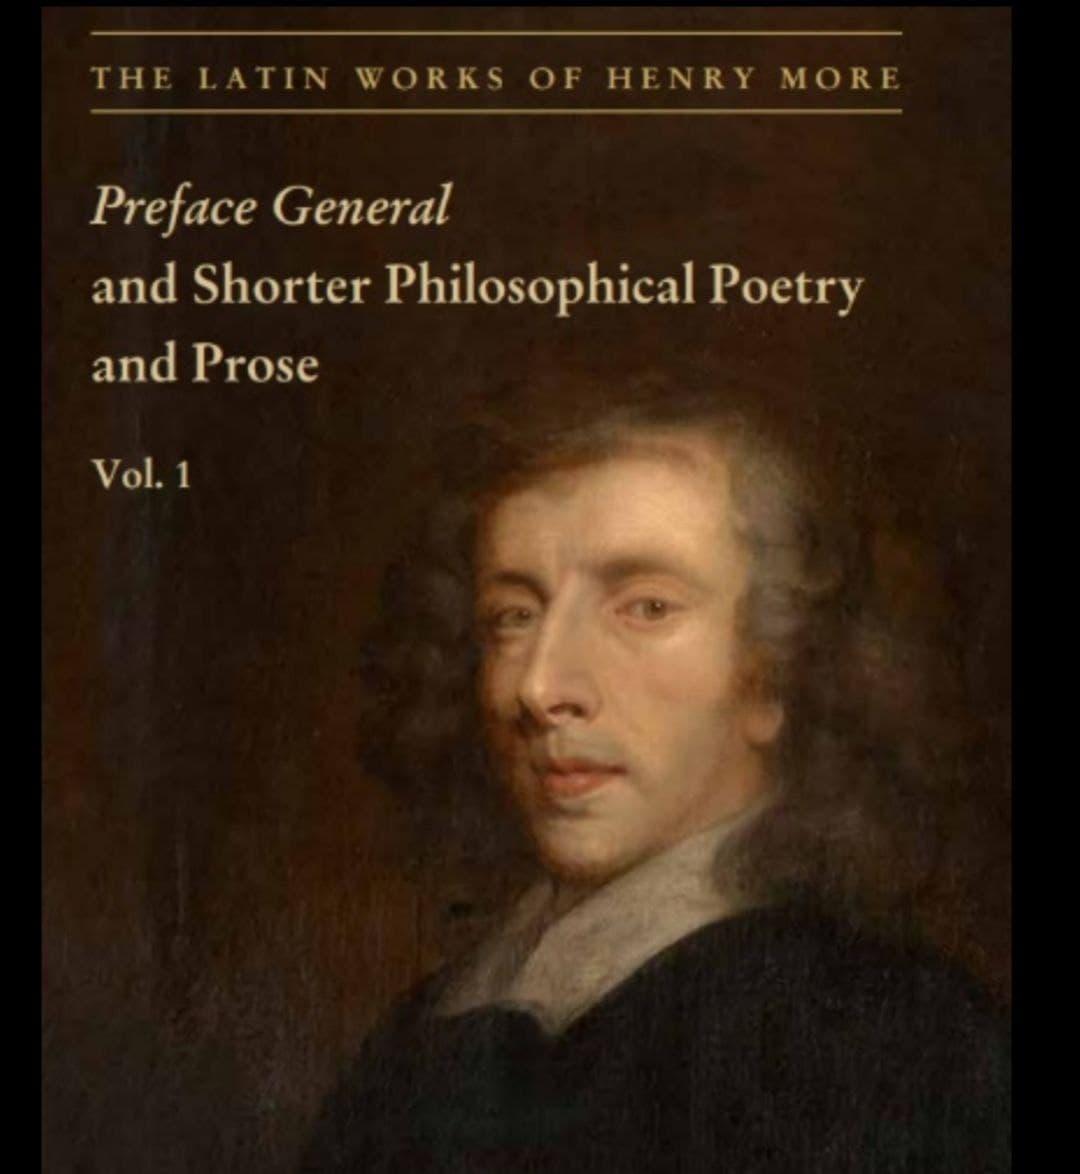 The Latin Works of Henry More